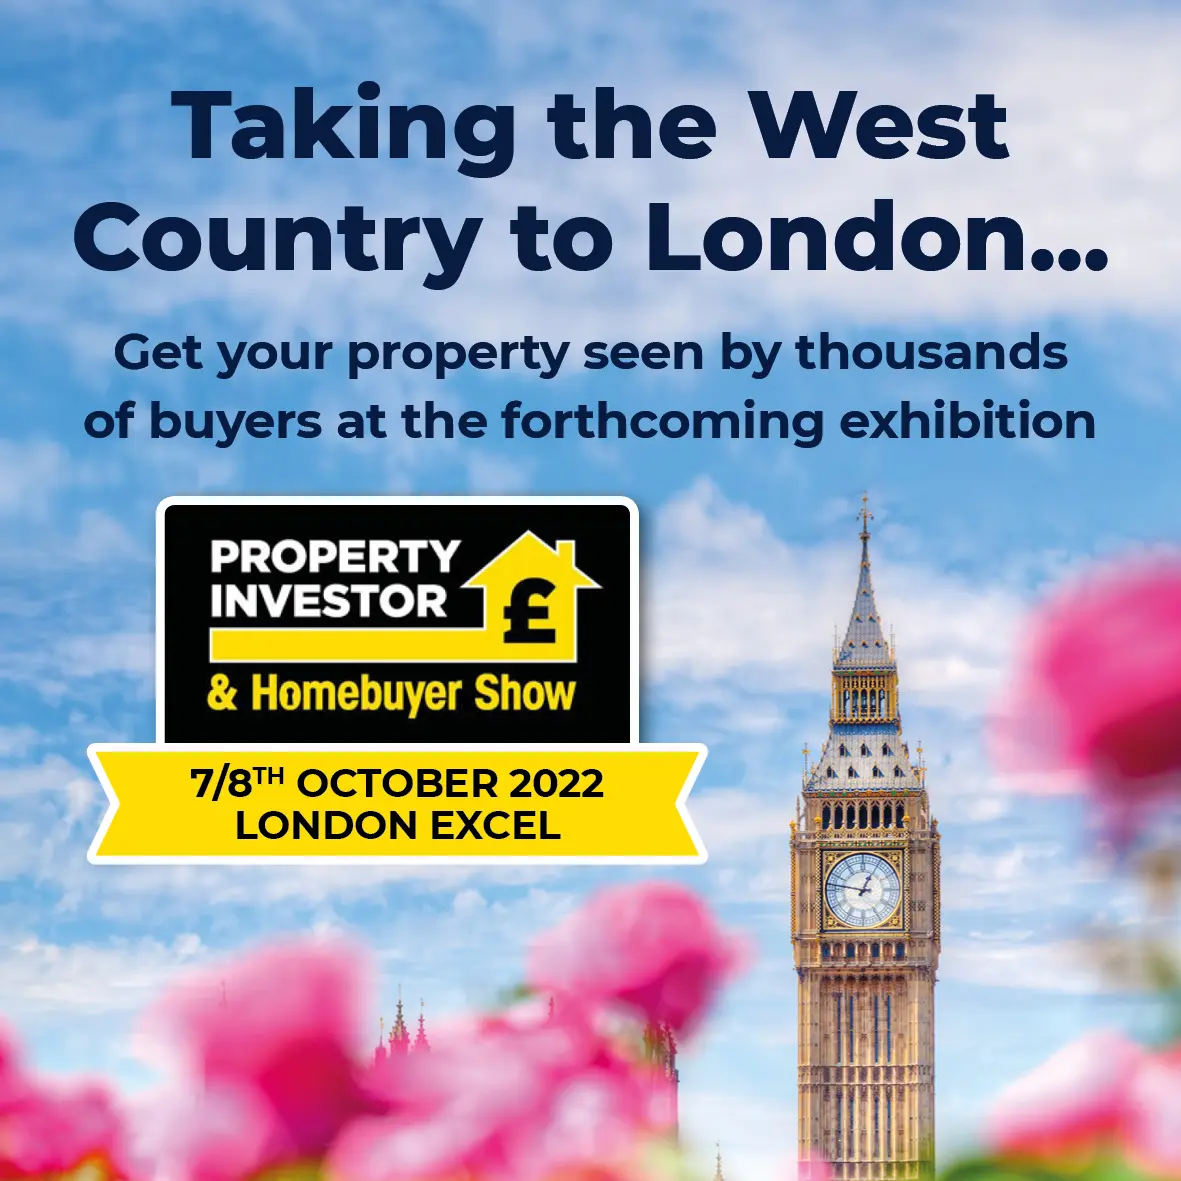 Take your property to London